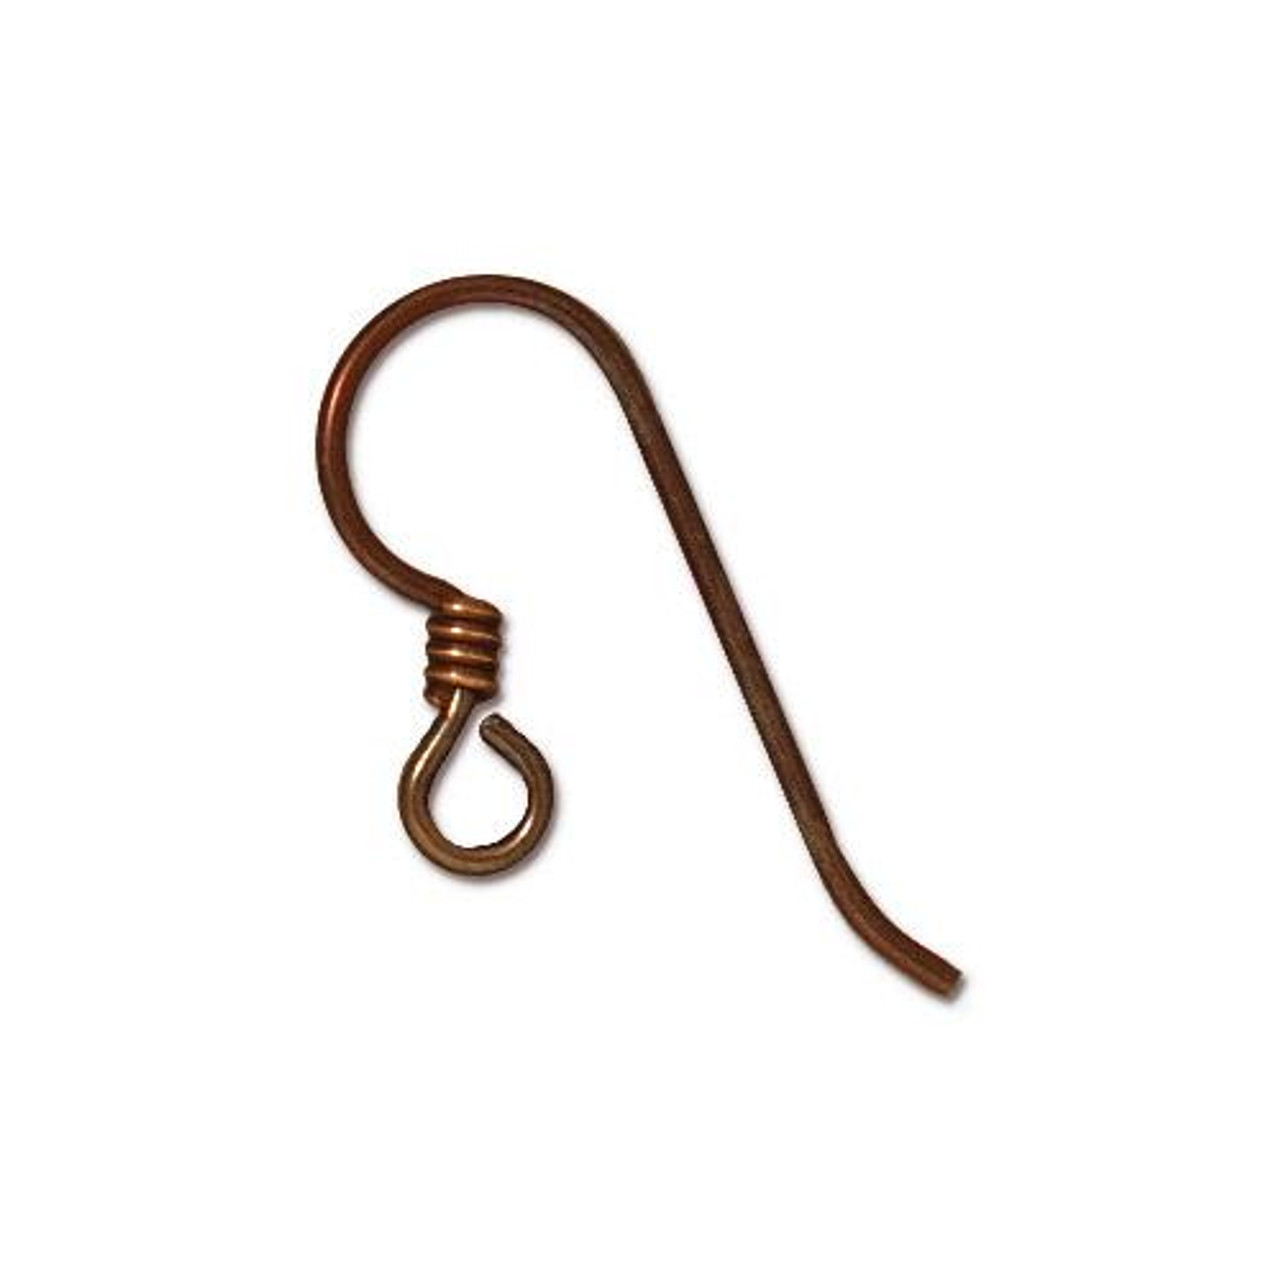 French Hook Ear Wire with Bronze Coil, Niobium Anodized Copper, 50 per Pack  - TierraCast, Inc.